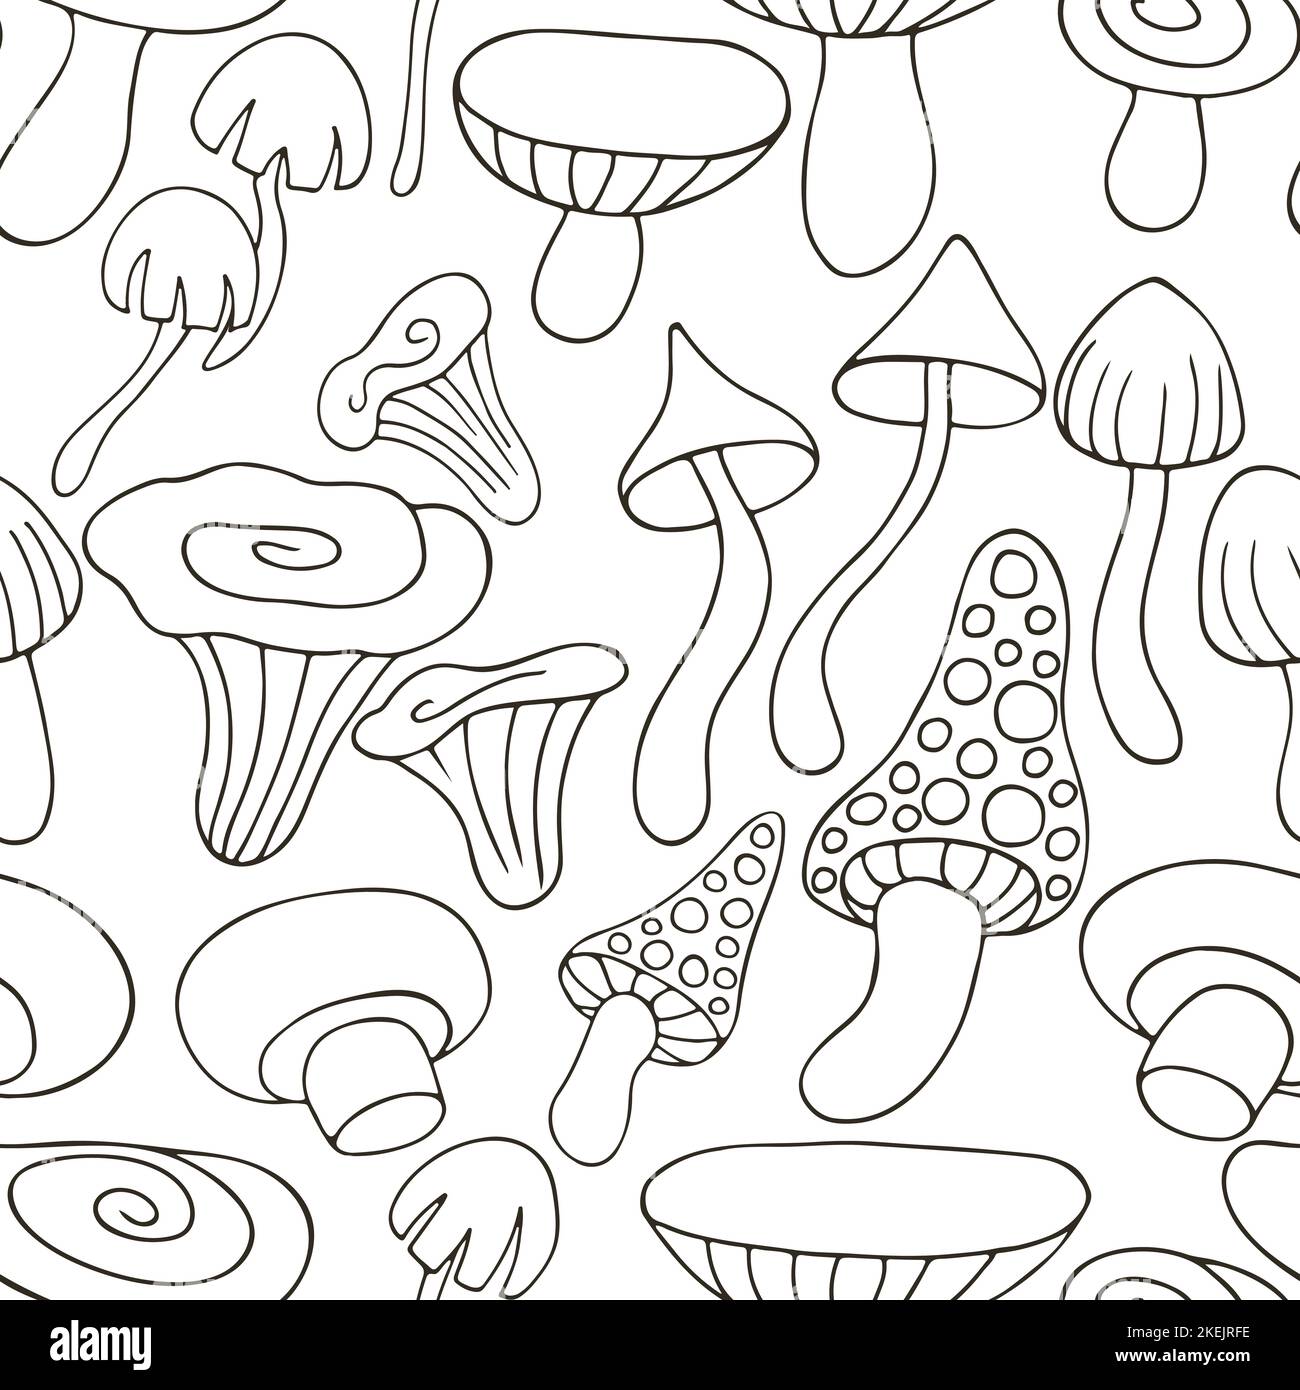 Mushroom autumn mood. Illustration in hand draw style. Seamless pattern with forest mushrooms. Can be used for fabric, packaging, wrapping and etc Stock Vector